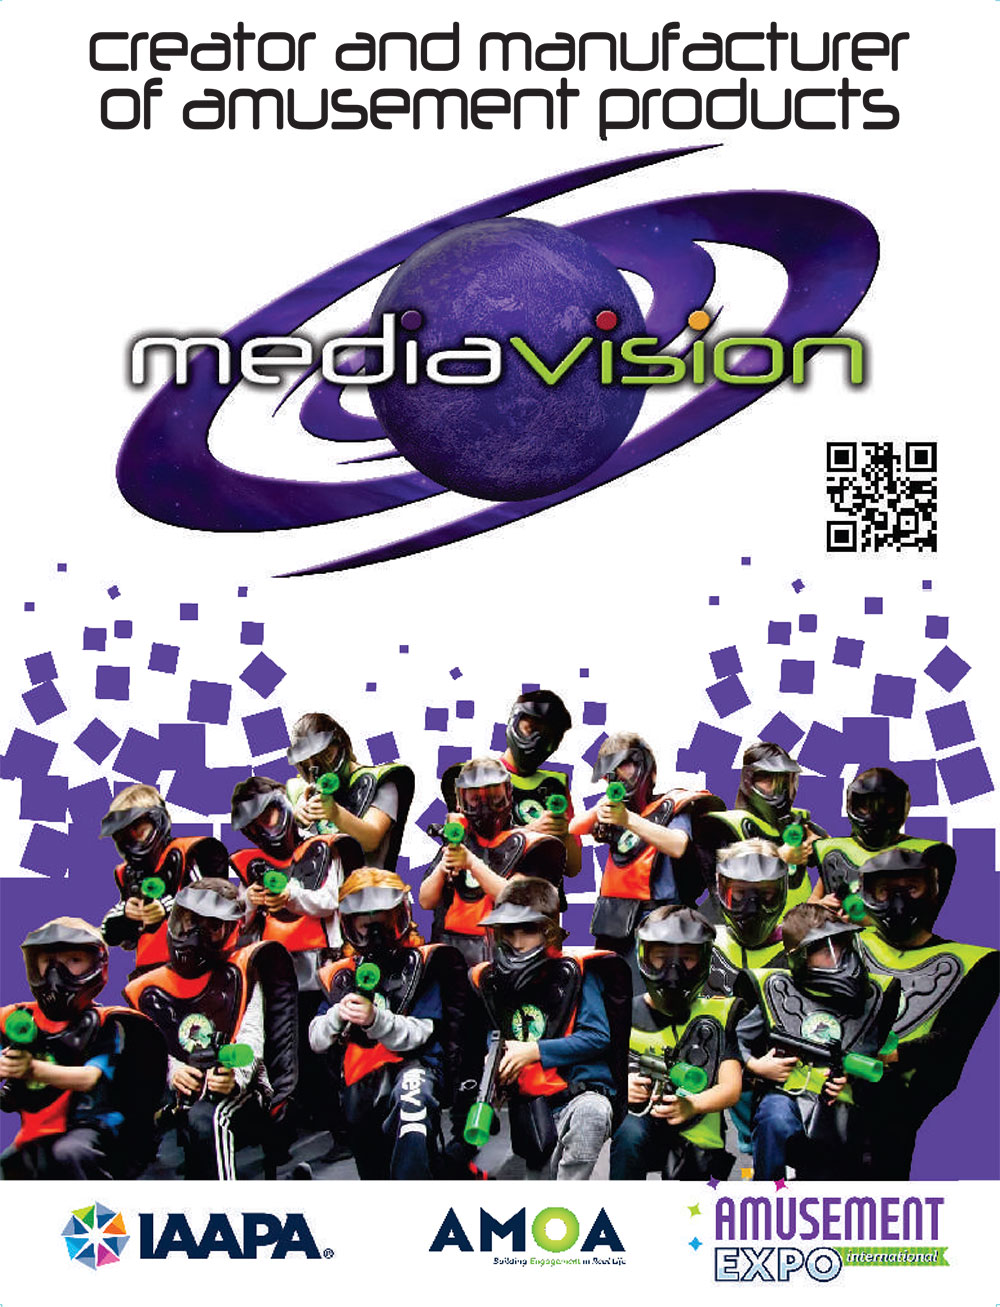 Media Vision Inc. - Creator and Manufacturer of Amusement Products -  PhazerZone Systems, Plazma Force Laser Tag, Bazooka Ball, Time Travel Laset  Adventure, Inflatable Bouncers, Jumping Castles, Amusements, Advertising  Balloons, Paintless Paintball